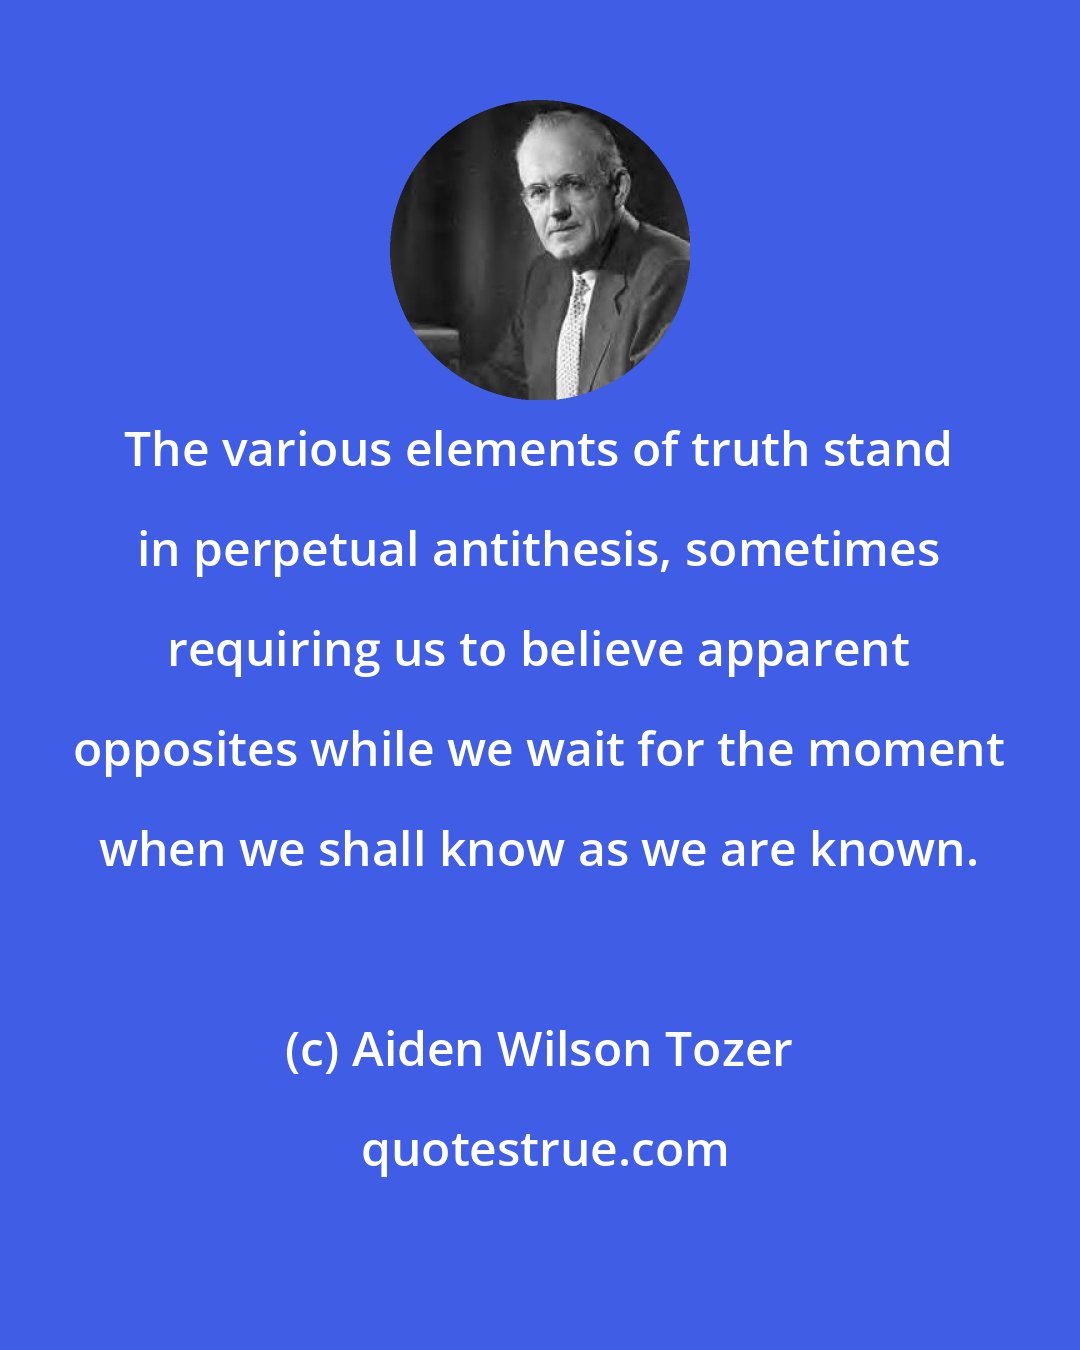 Aiden Wilson Tozer: The various elements of truth stand in perpetual antithesis, sometimes requiring us to believe apparent opposites while we wait for the moment when we shall know as we are known.